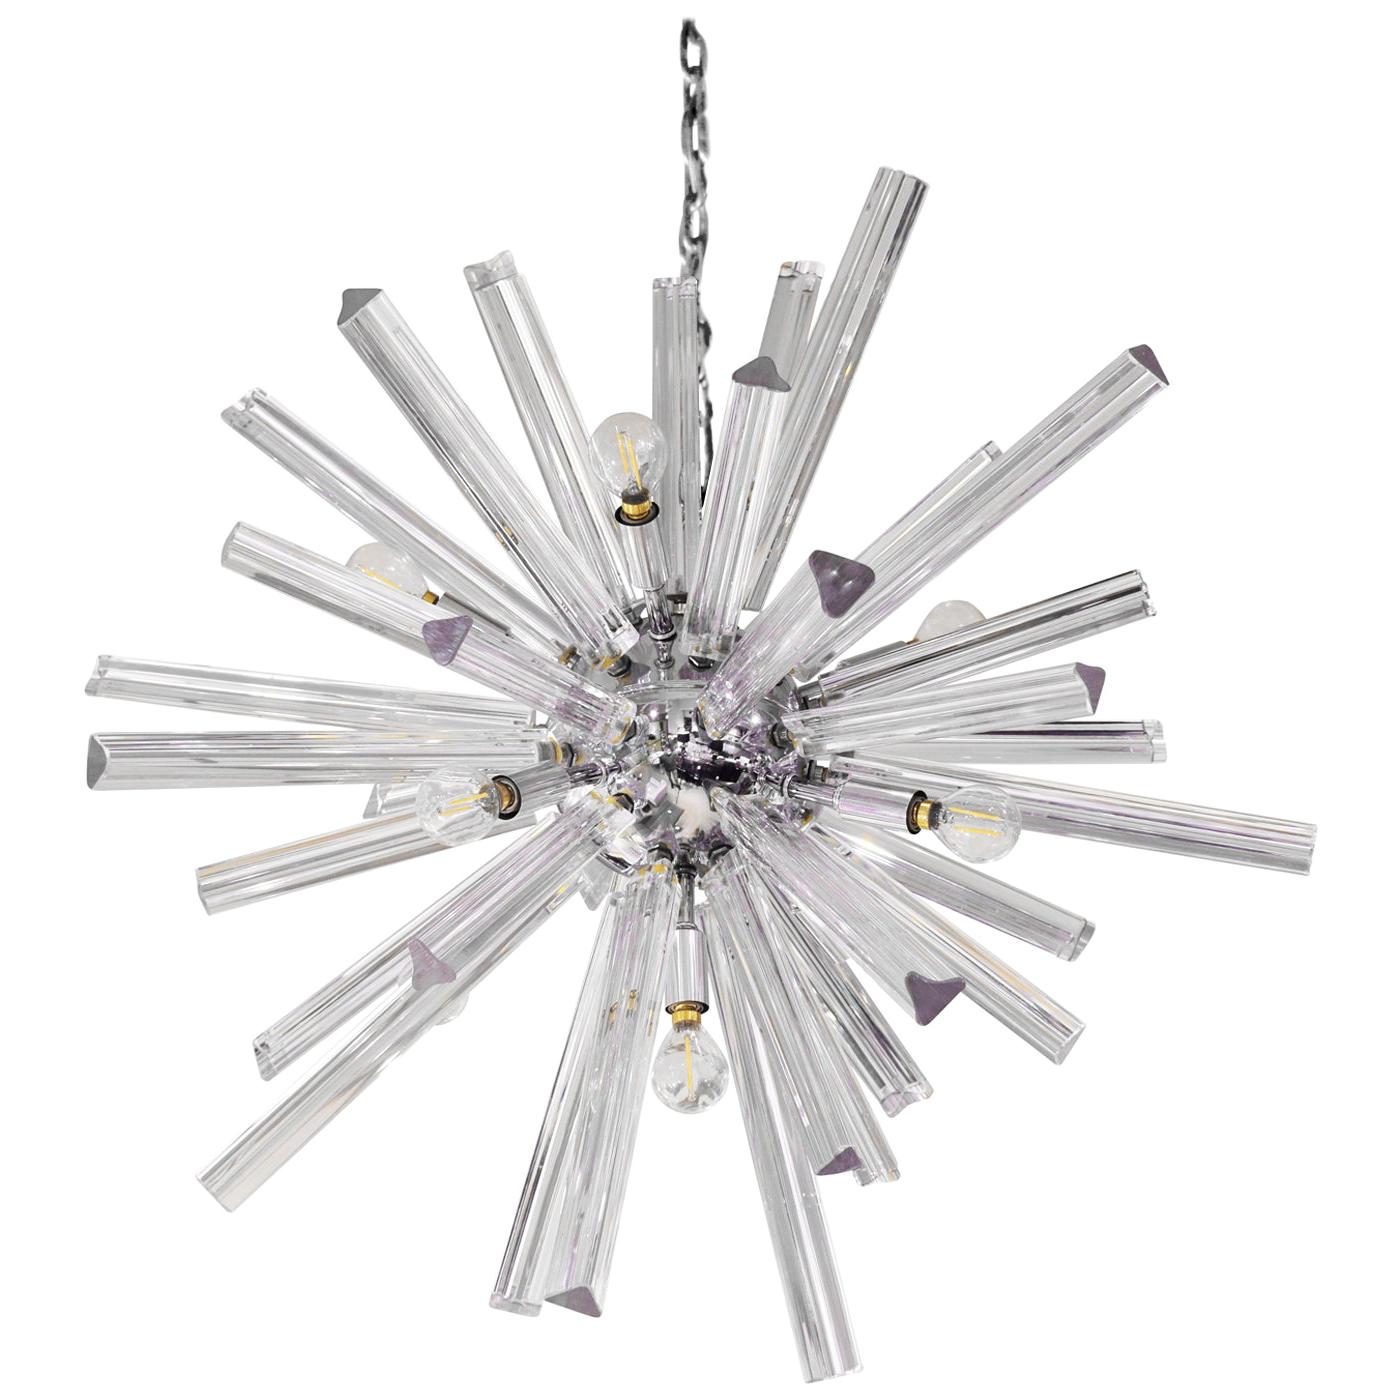 Sputnik Style Venini Chandelier in Chrome with Glass Rods, 1970s For Sale